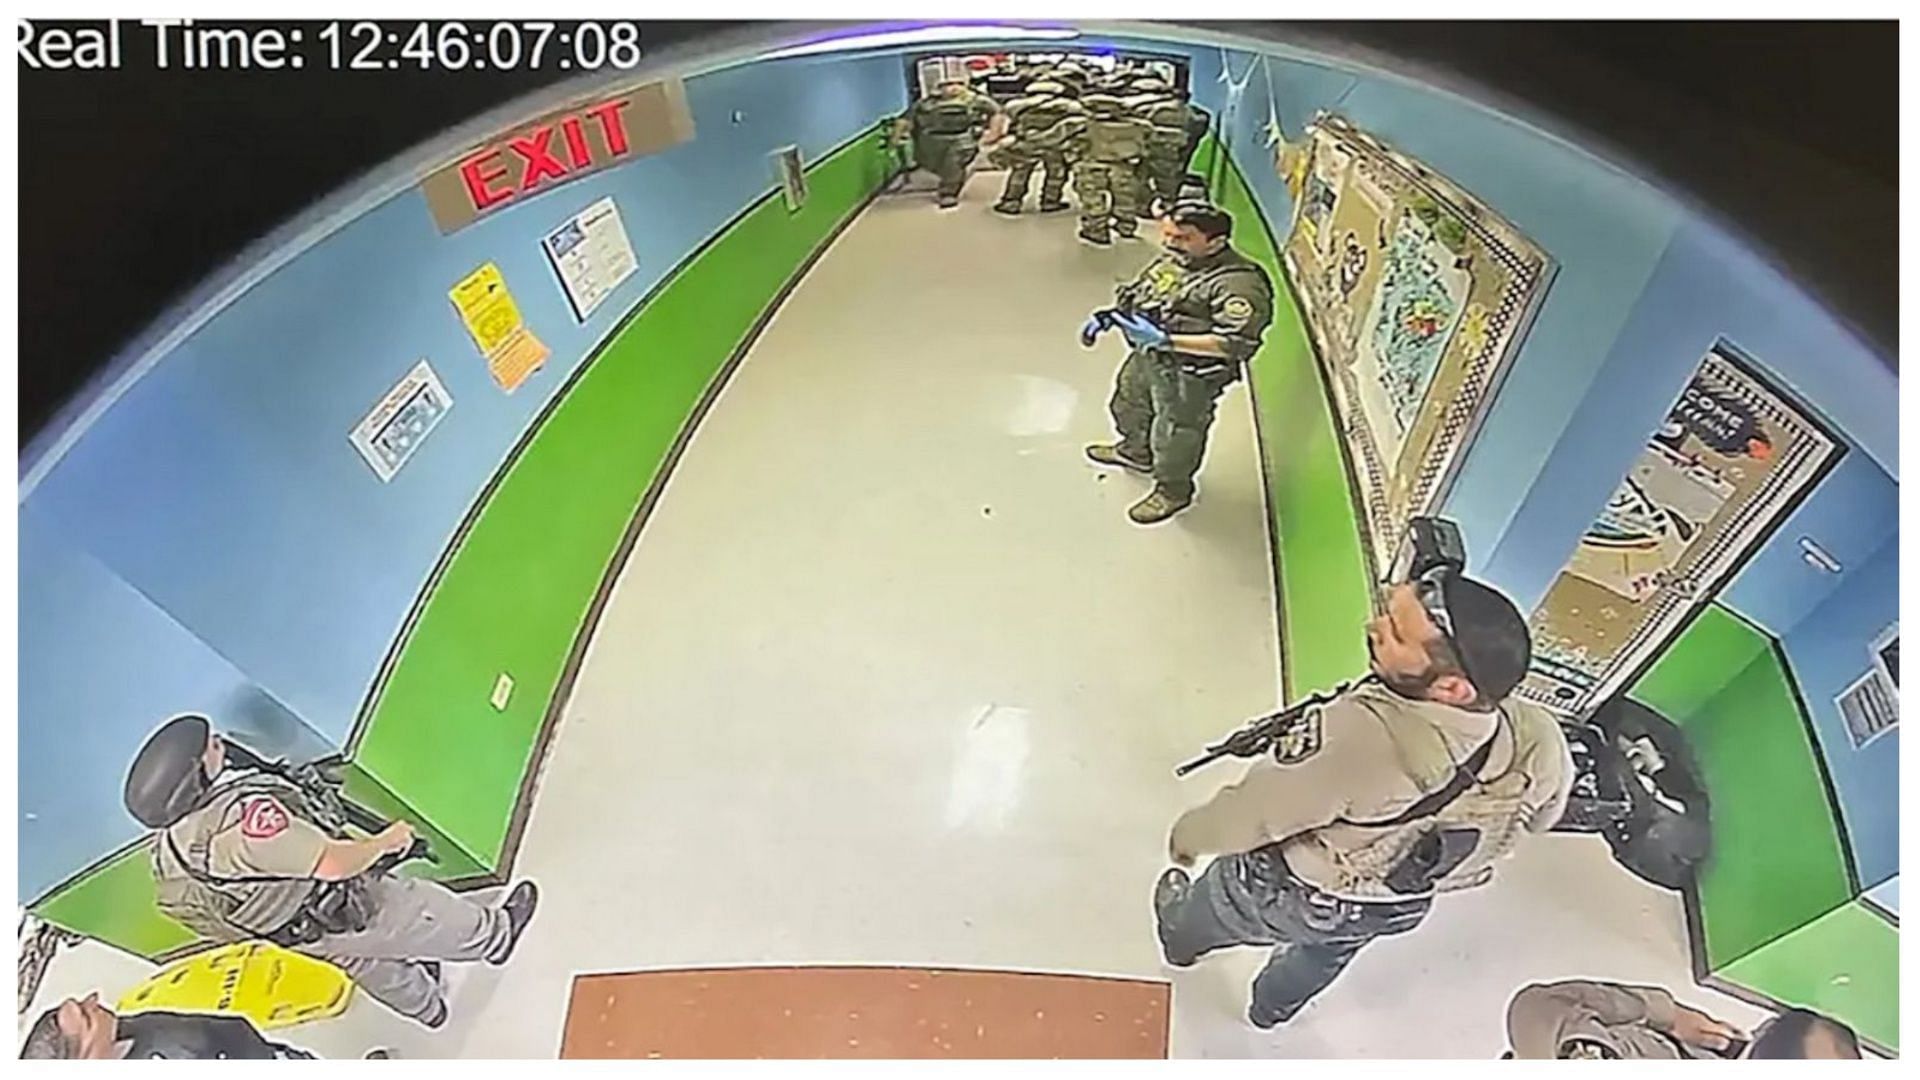 Authorities are seen waiting in the hallway instead of directly engaging with the shooter (image via Robb elementary school)